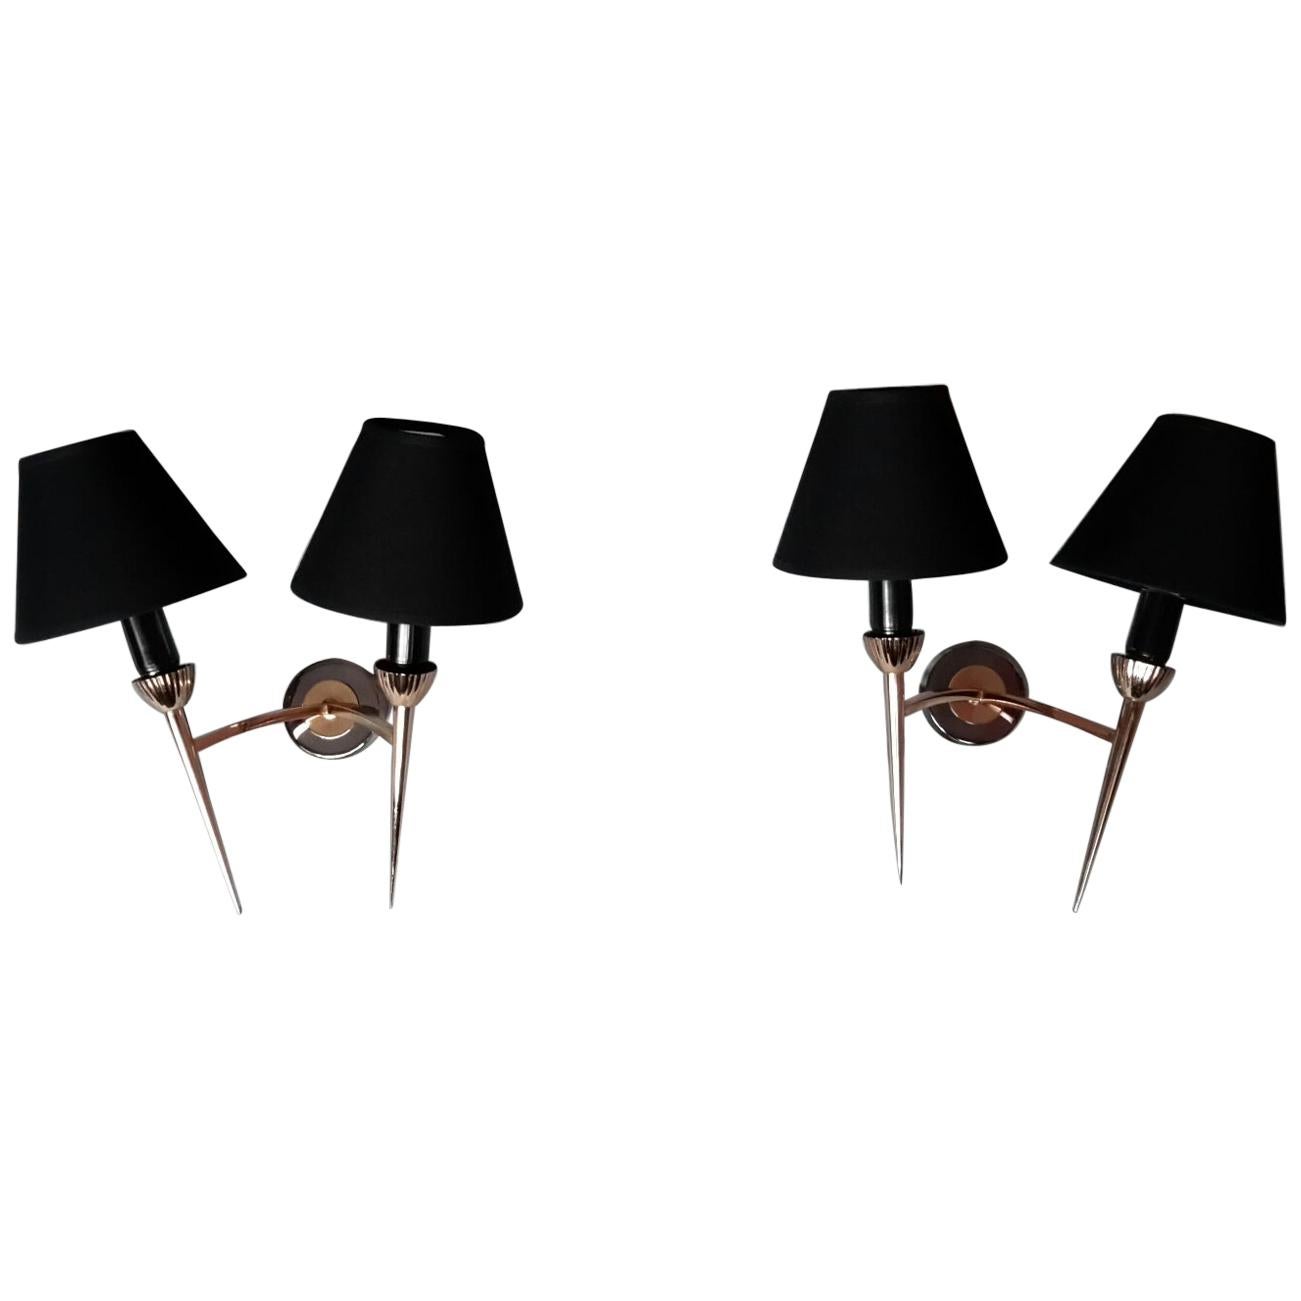 Pair of Neoclassical Sconces by Maison Lunel, France, 1950